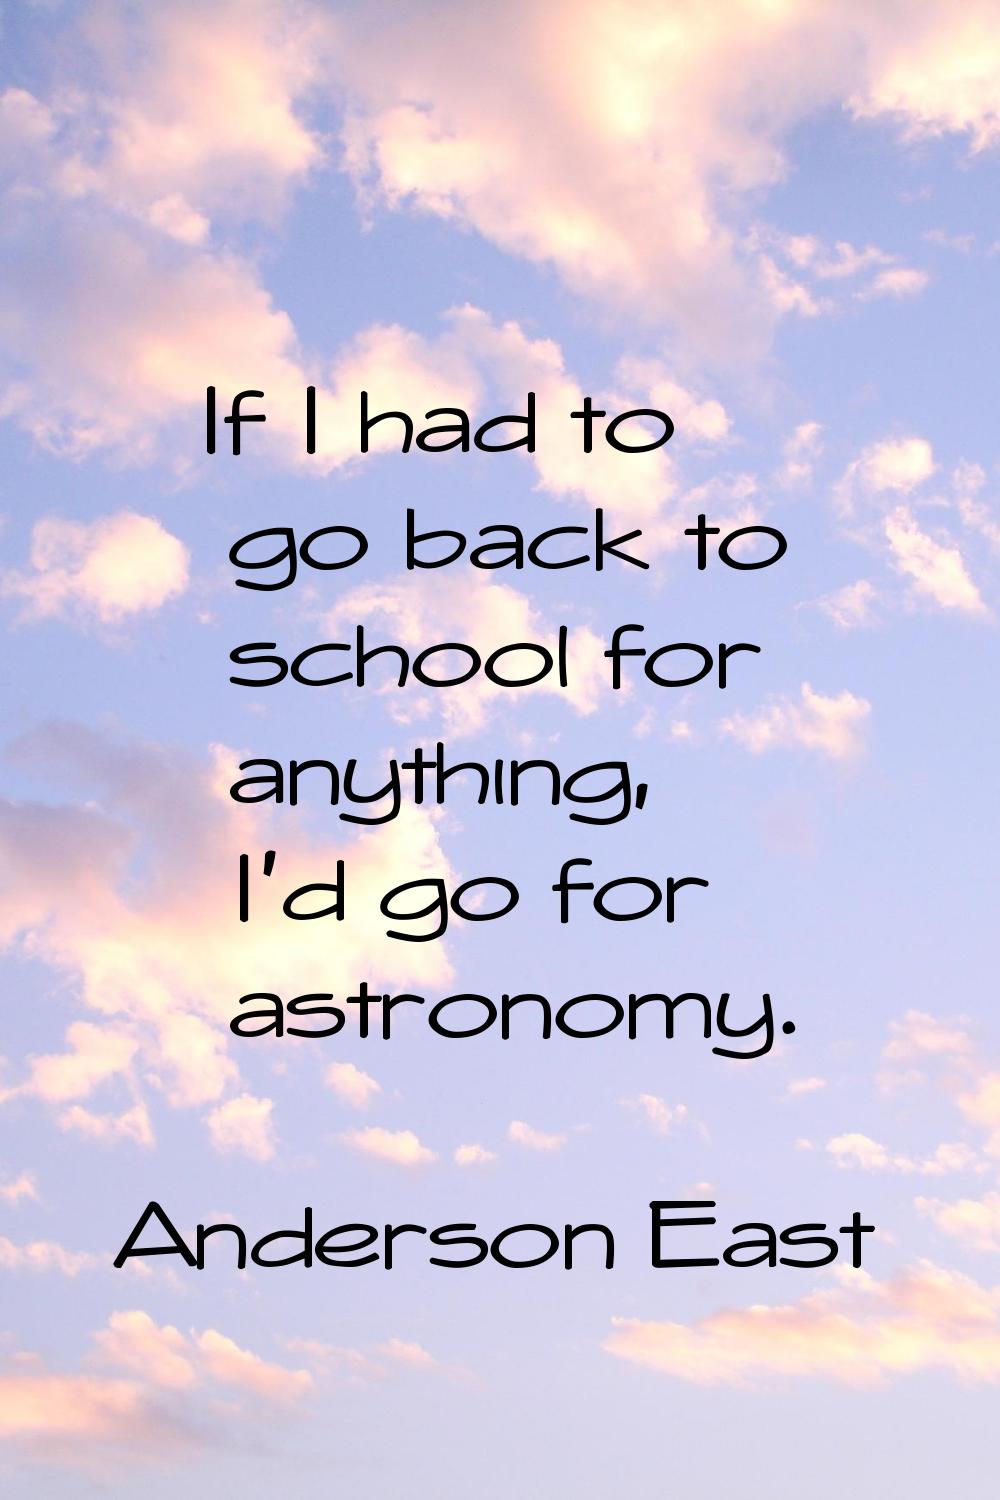 If I had to go back to school for anything, I'd go for astronomy.